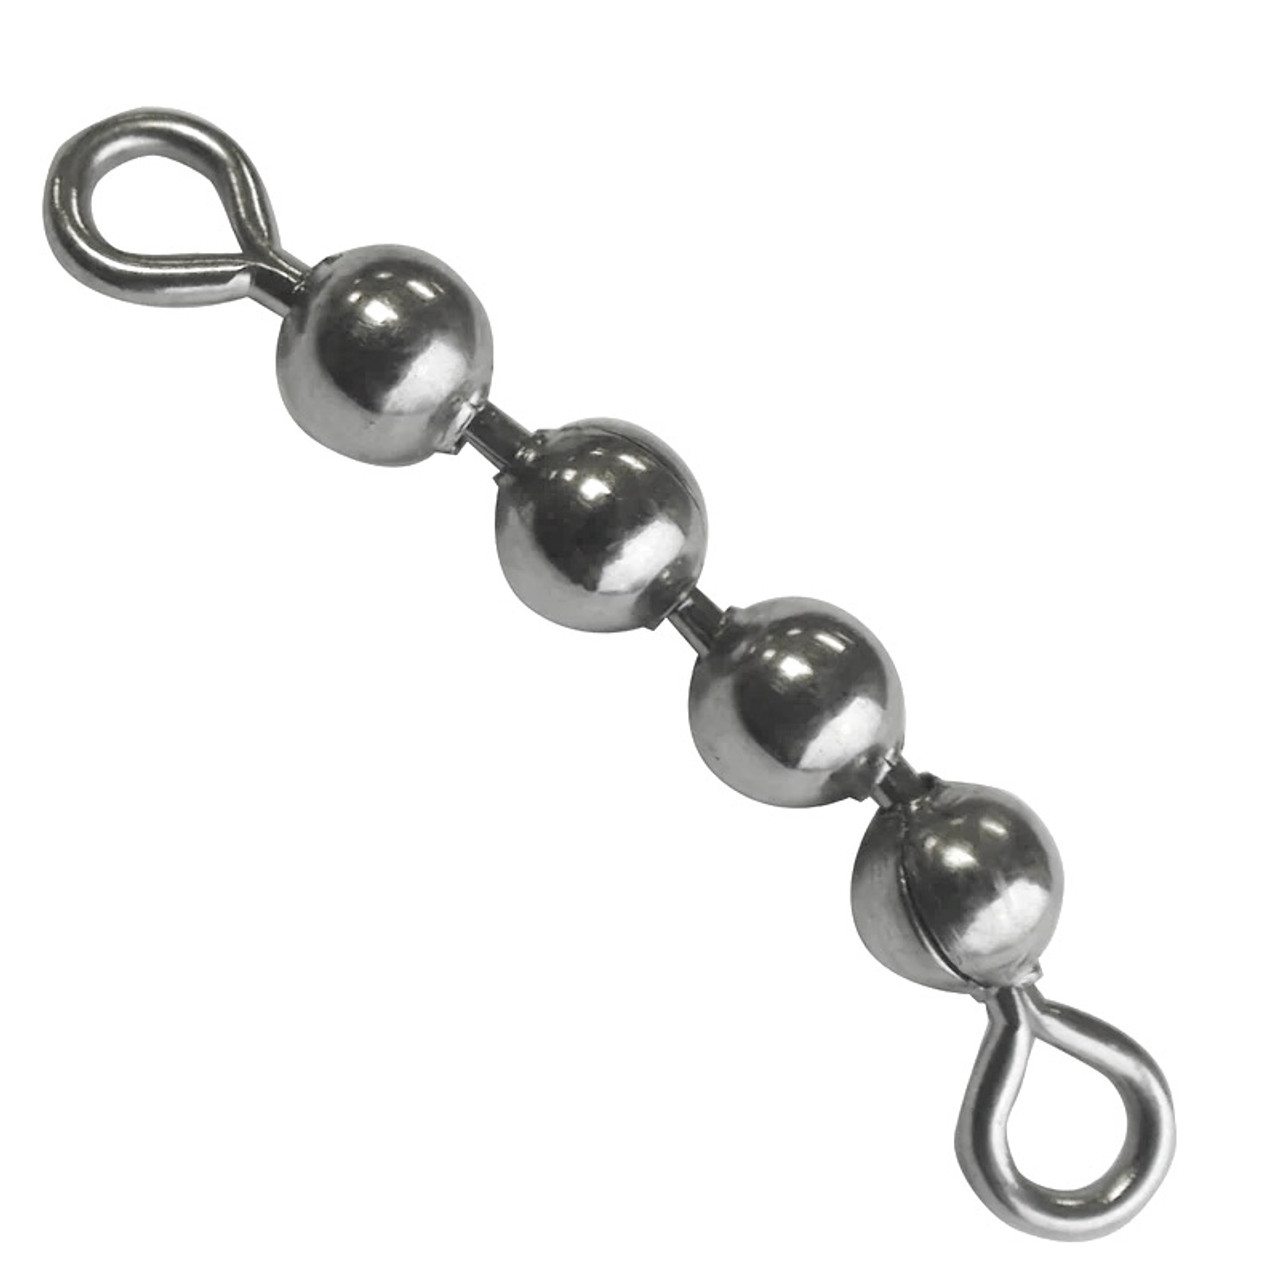 Bead Chain Swivels by Acme Tackle